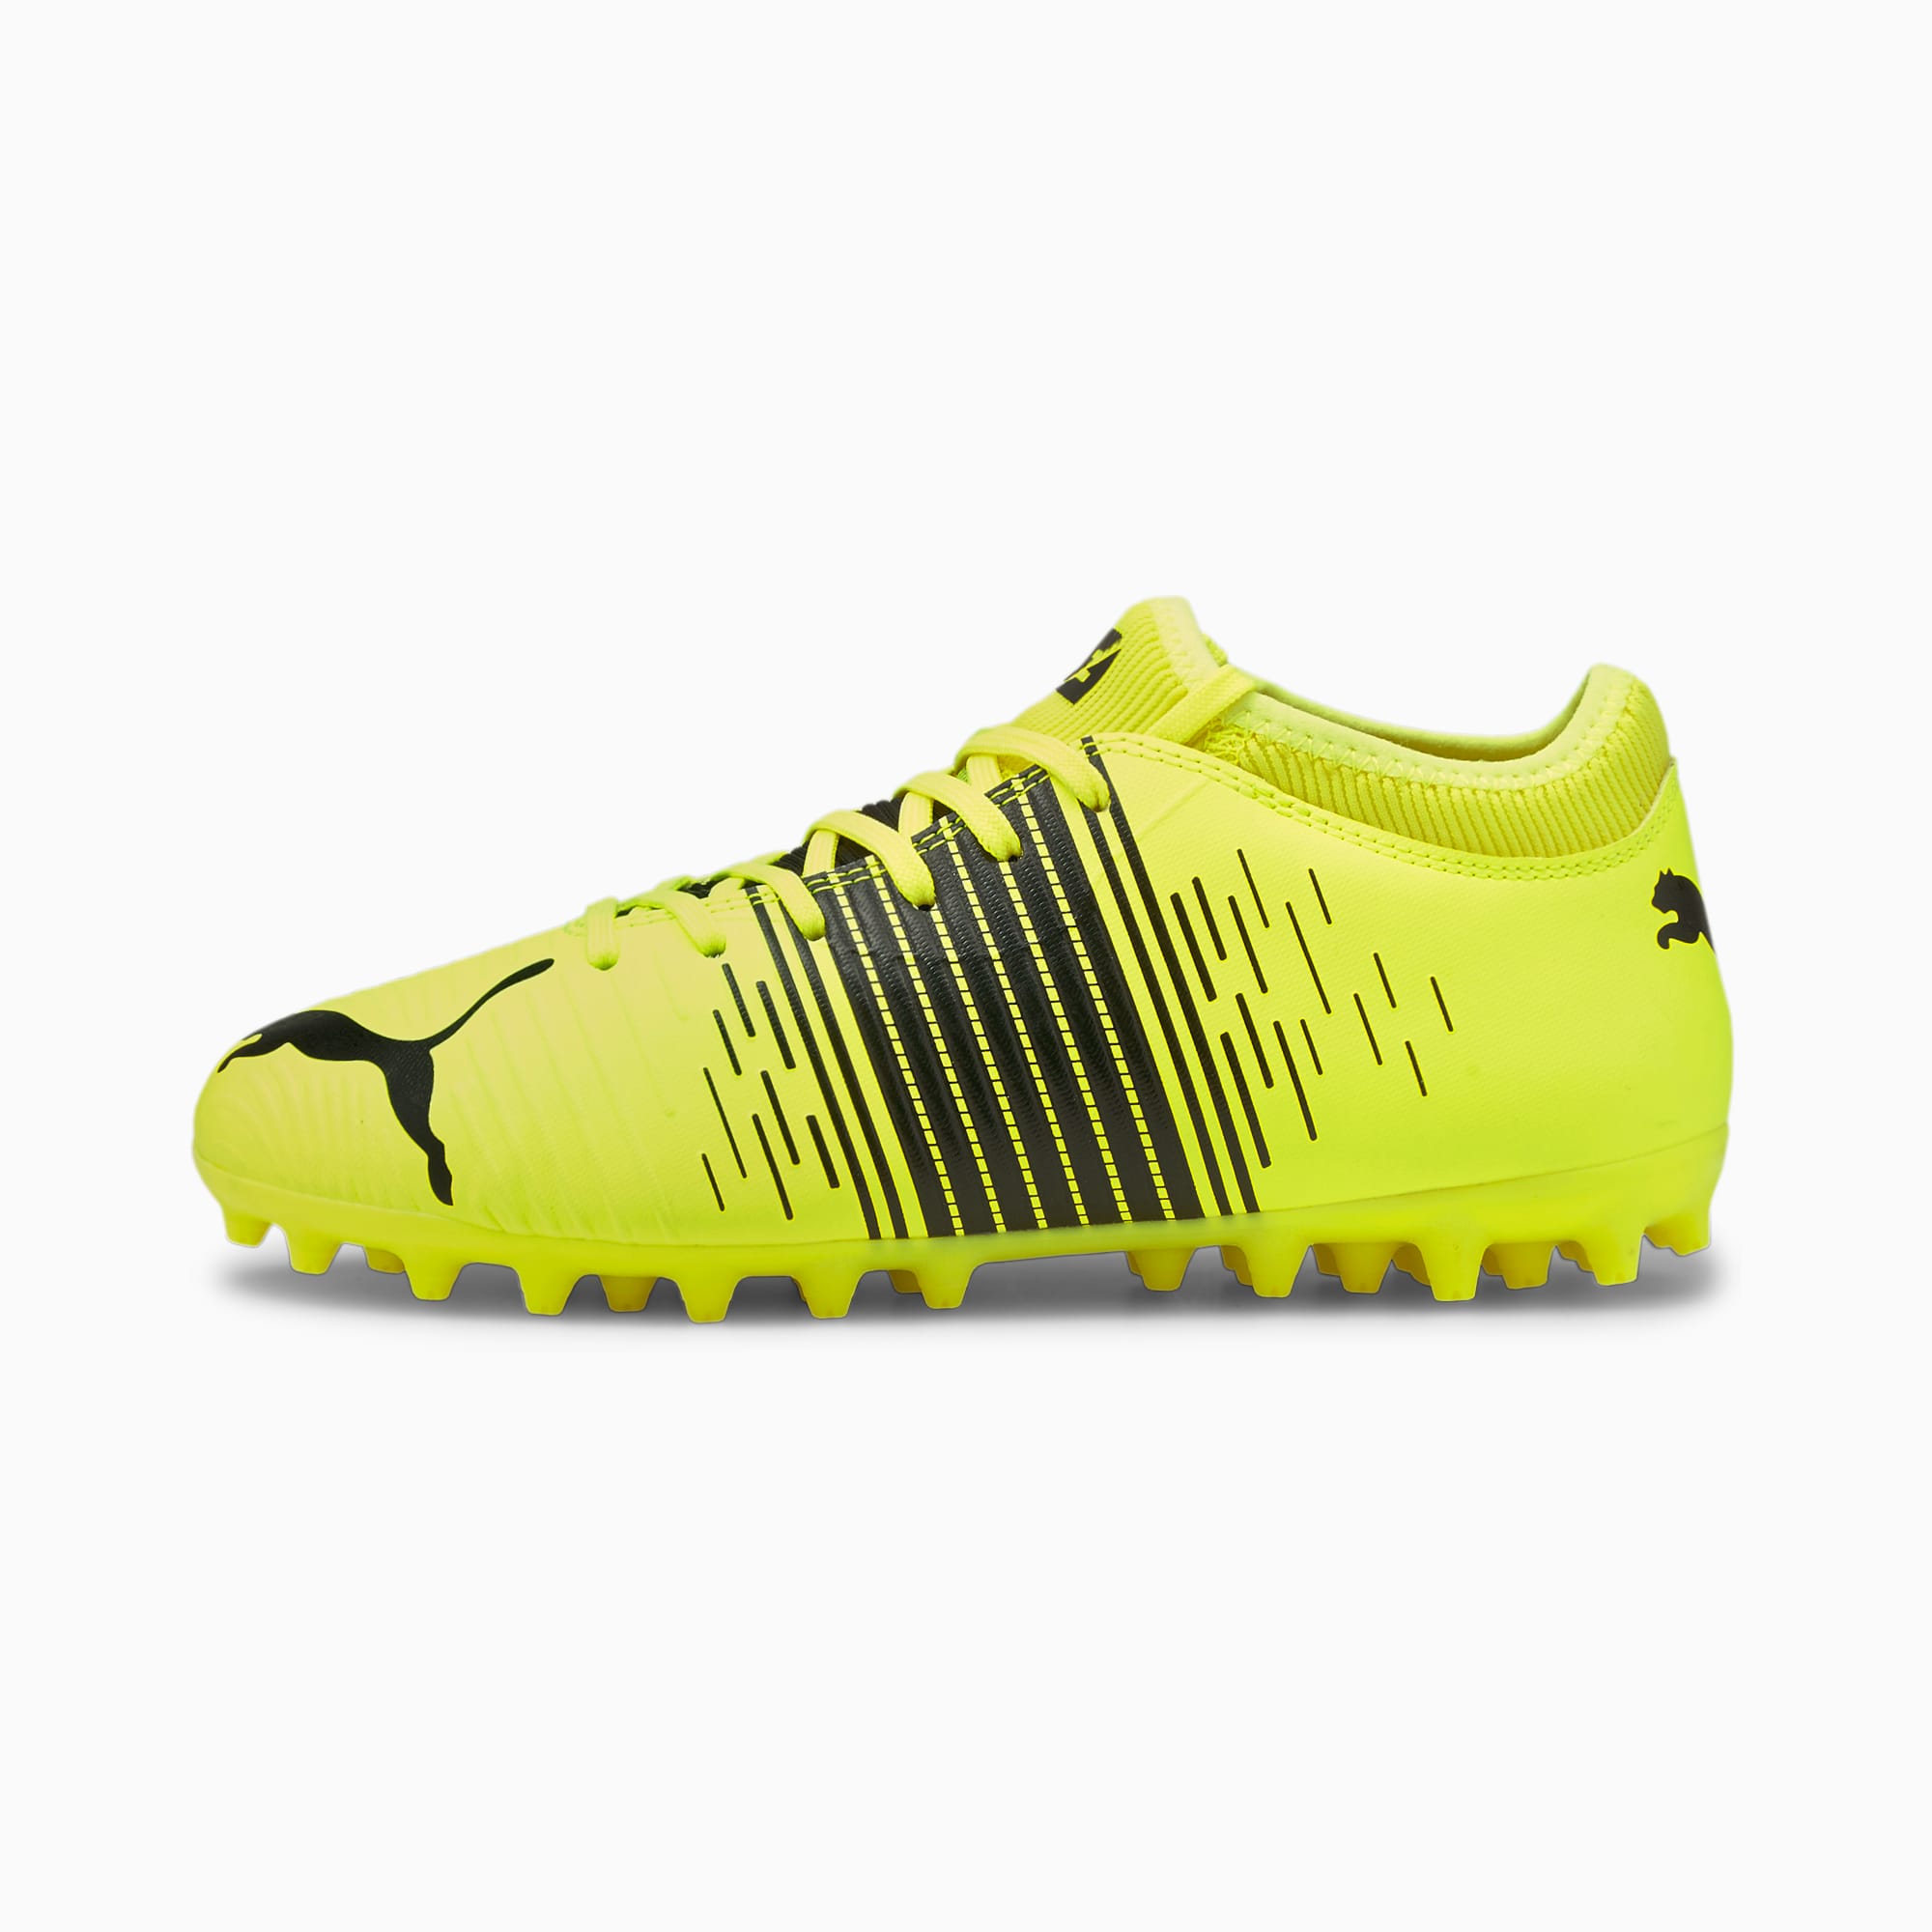 FUTURE Z 4.1 MG Youth Football Boots 